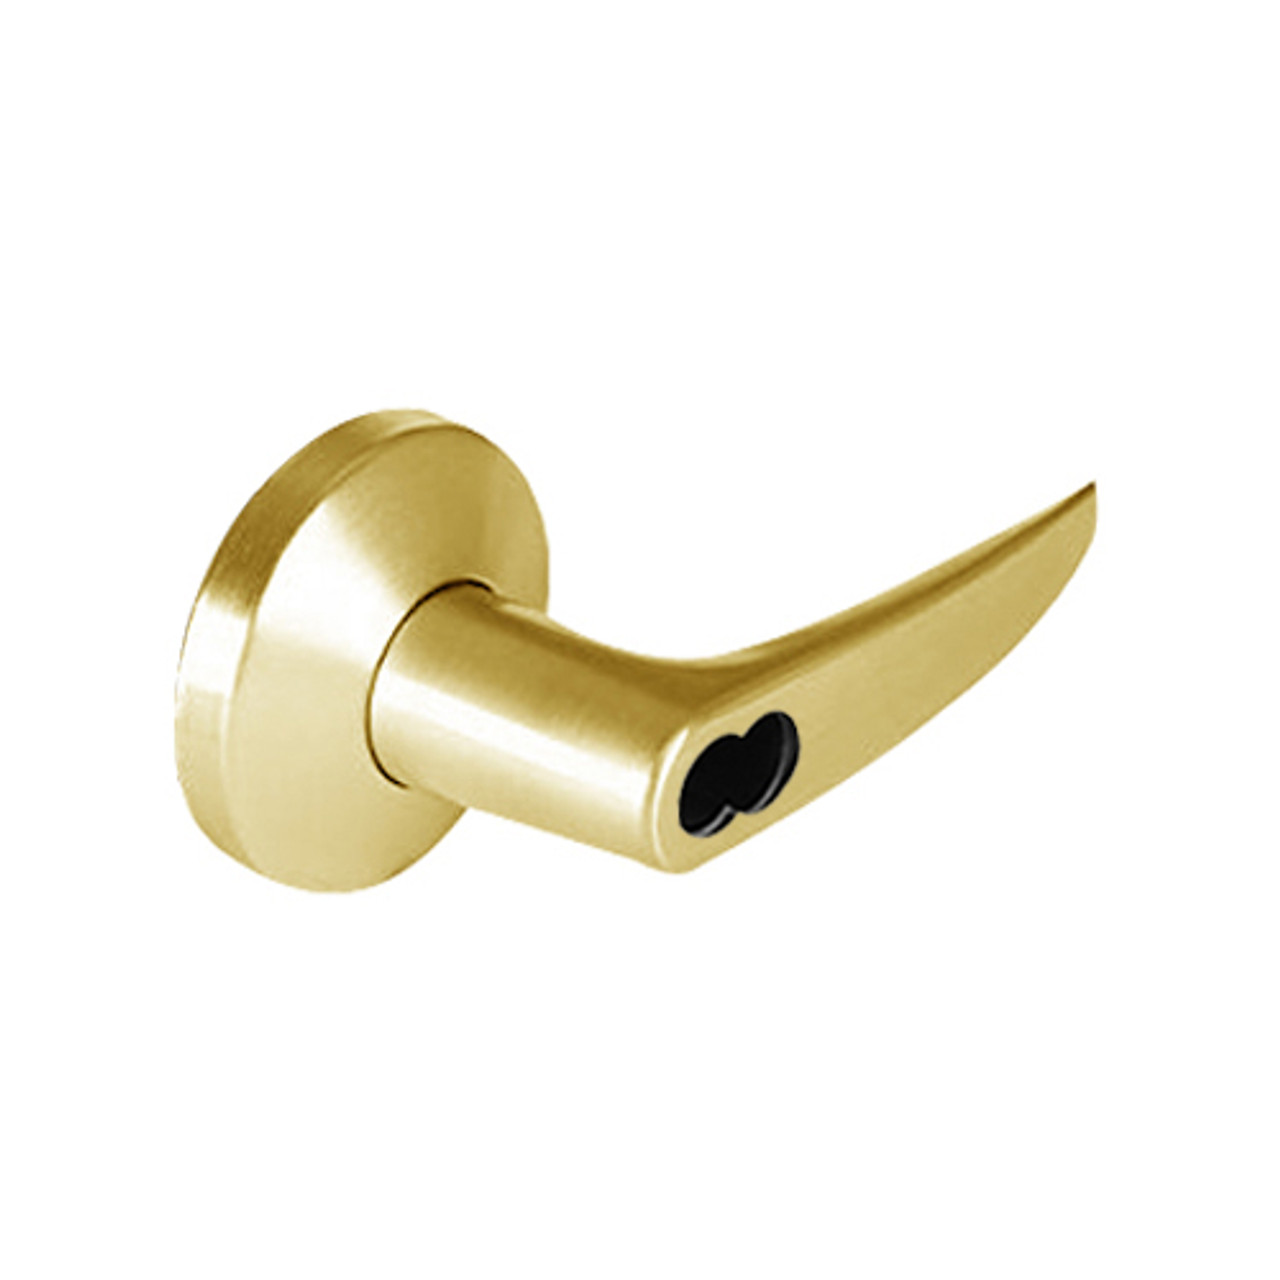 9K37YR16KSTK605 Best 9K Series Special Function Cylindrical Lever Locks with Curved without Return Lever Design Accept 7 Pin Best Core in Bright Brass